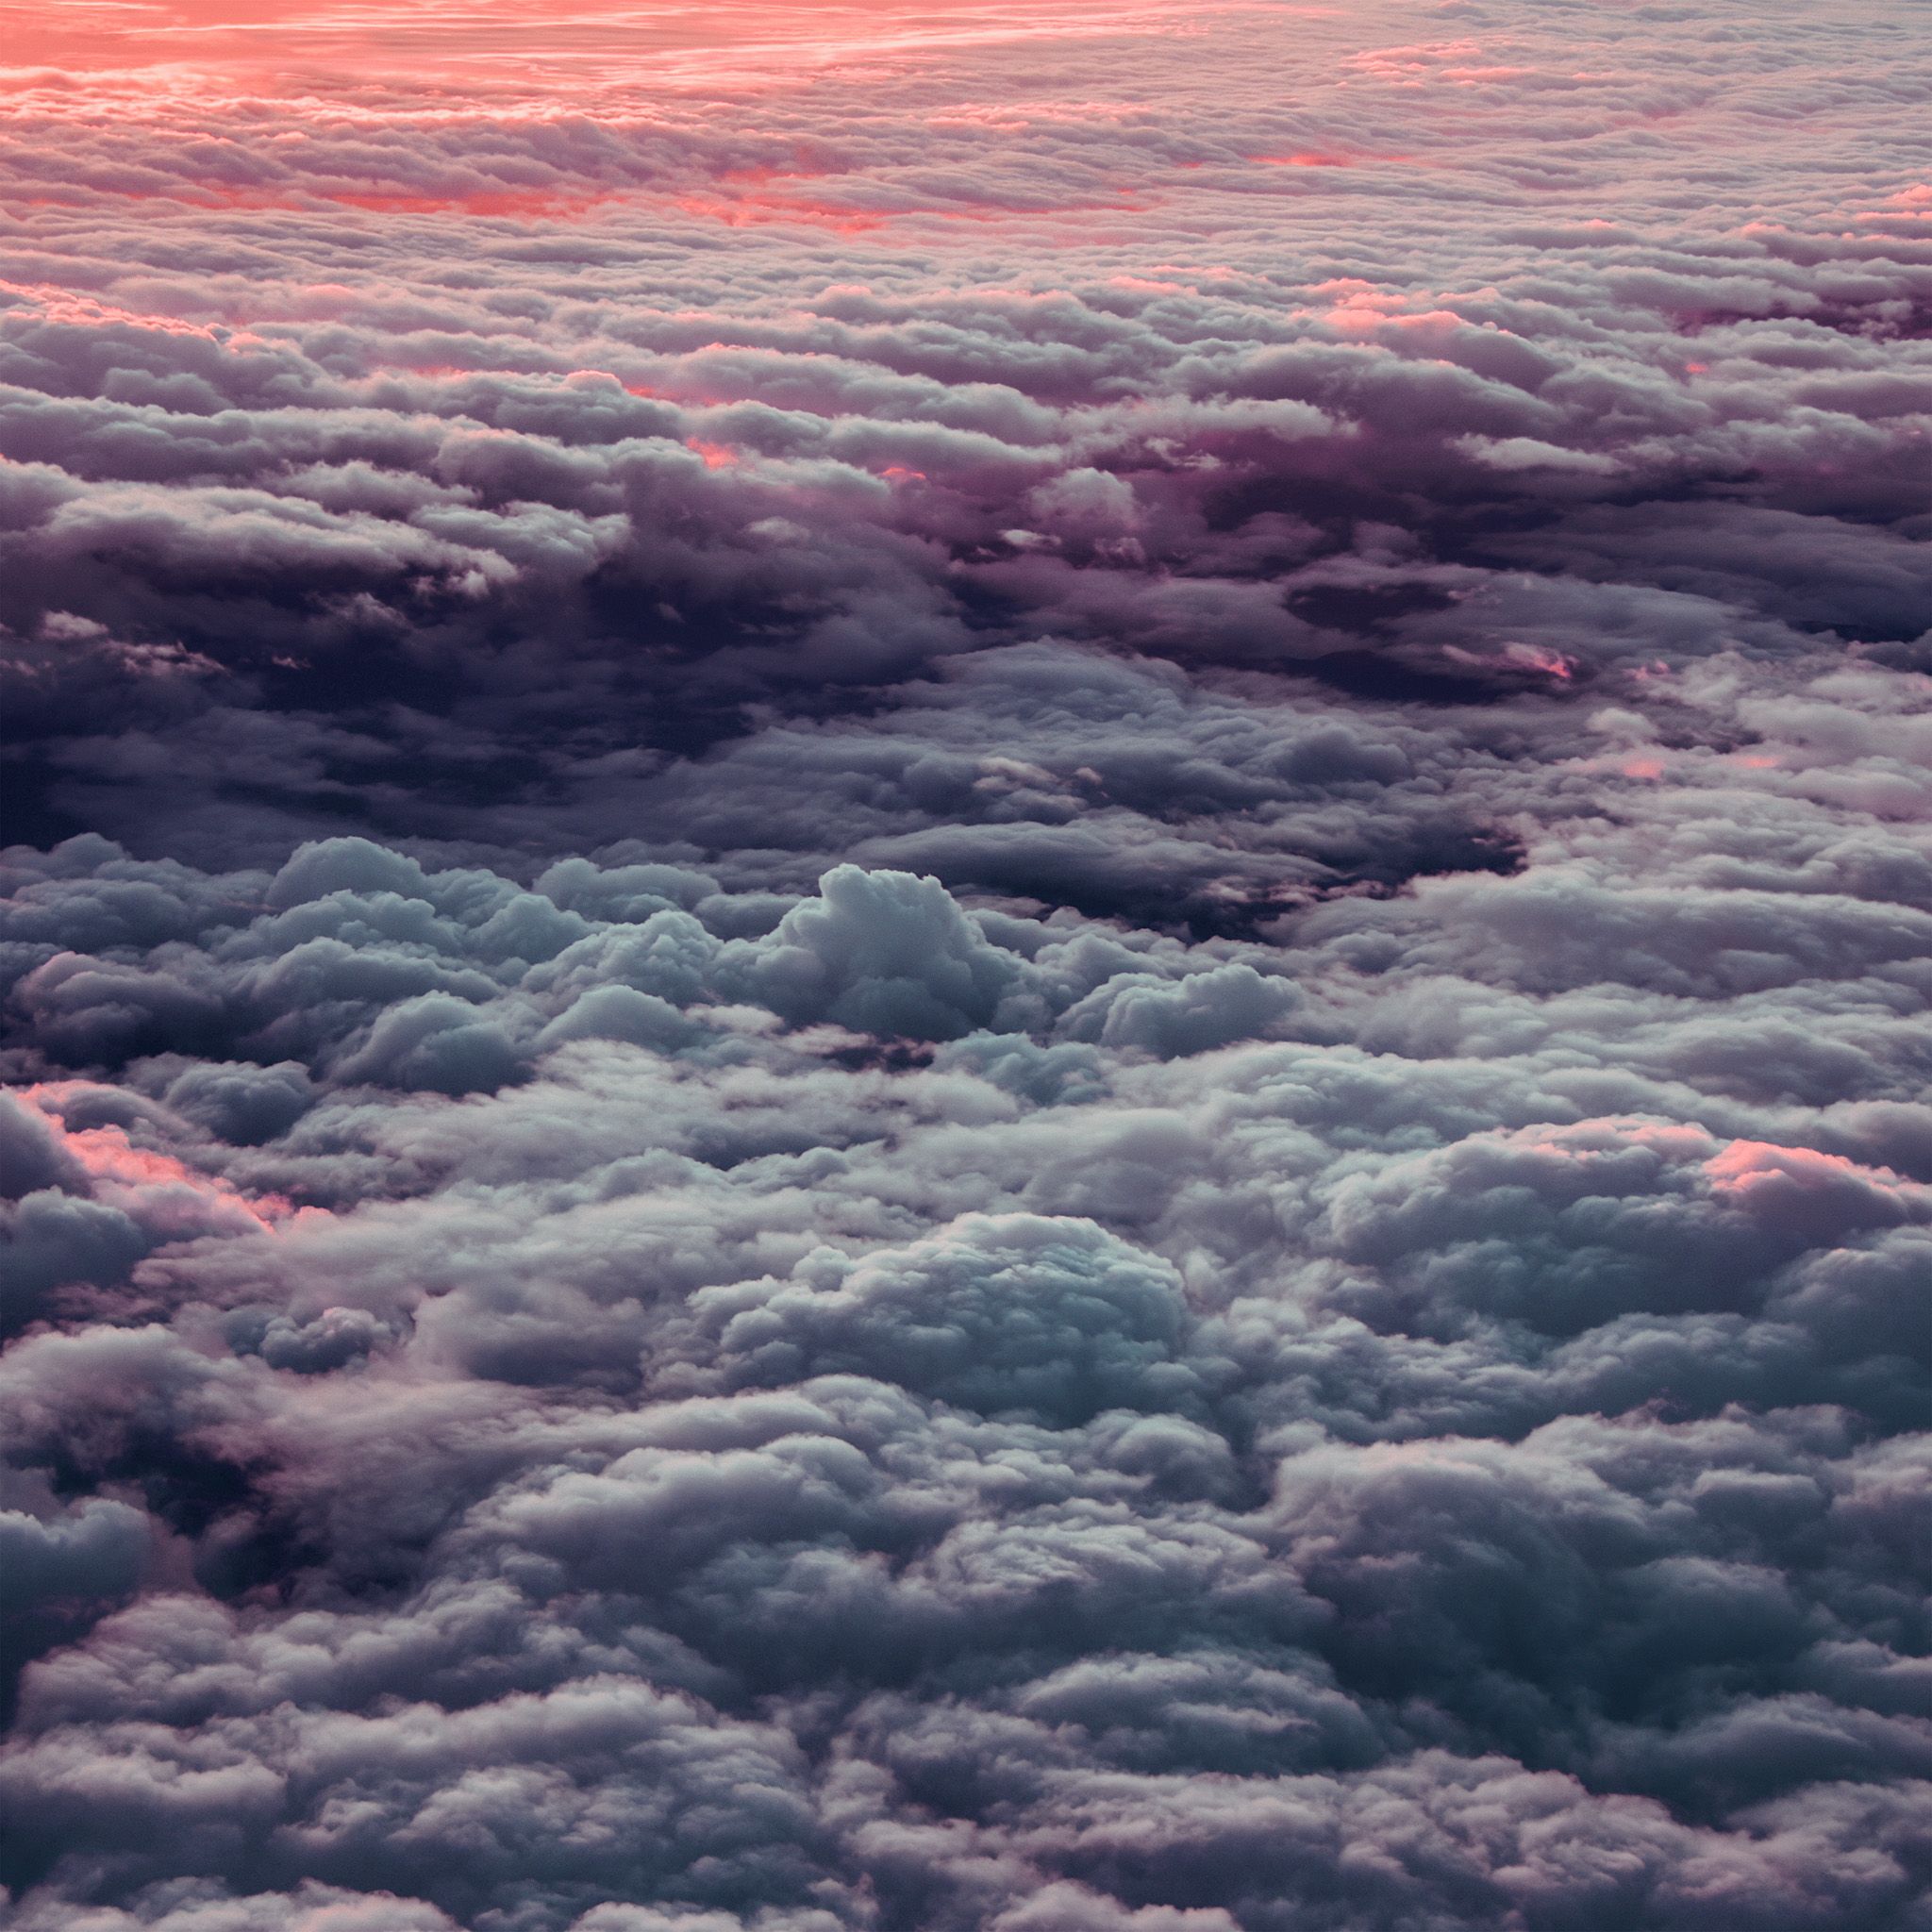 A photo of a sky filled with clouds during sunset - Sunrise